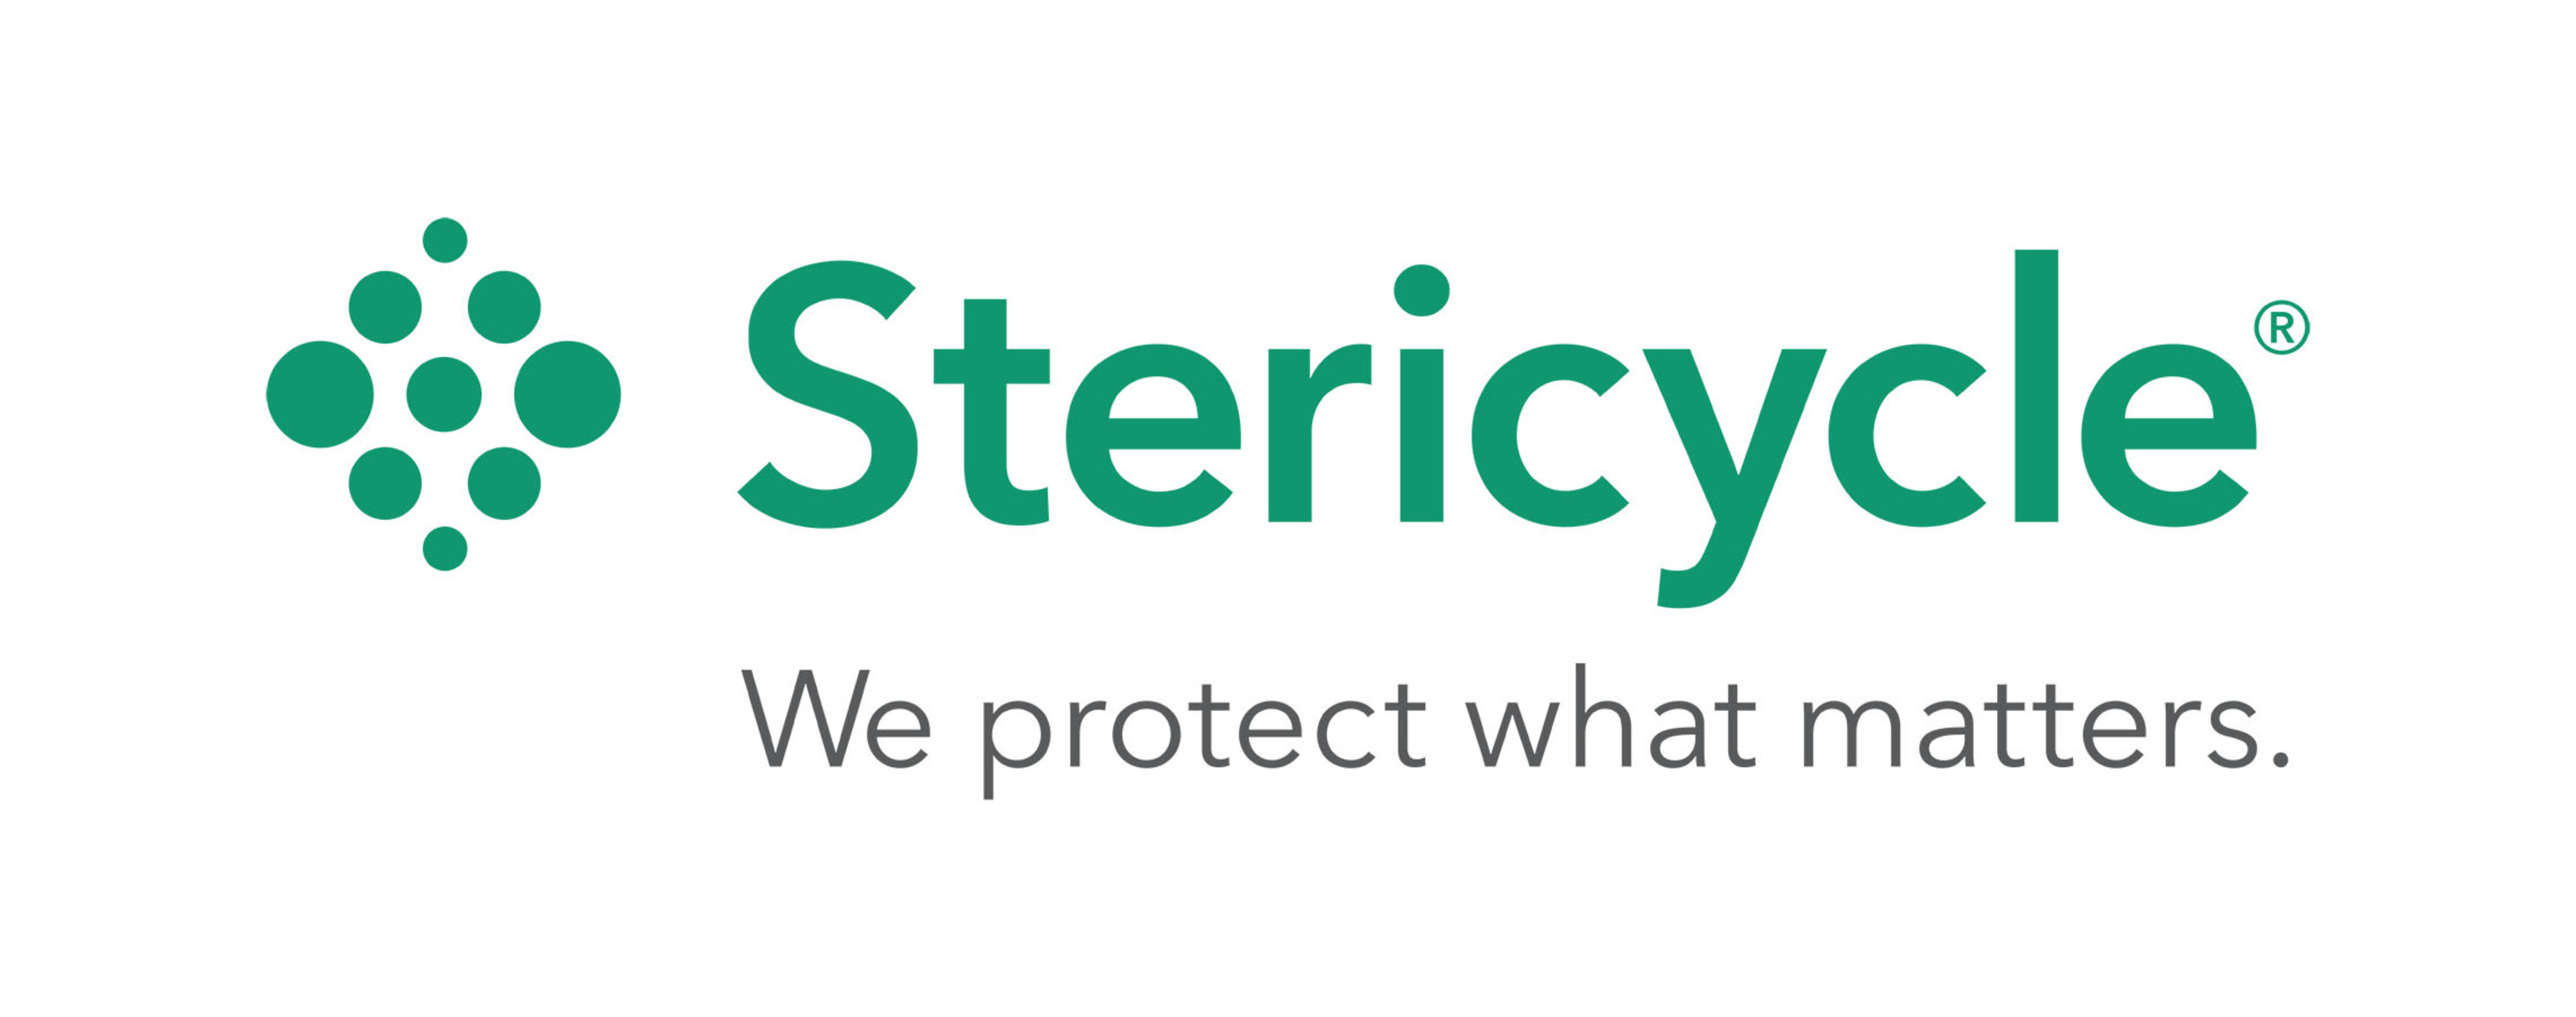 Stericycle Publishes Annual Corporate Social Responsibility Report